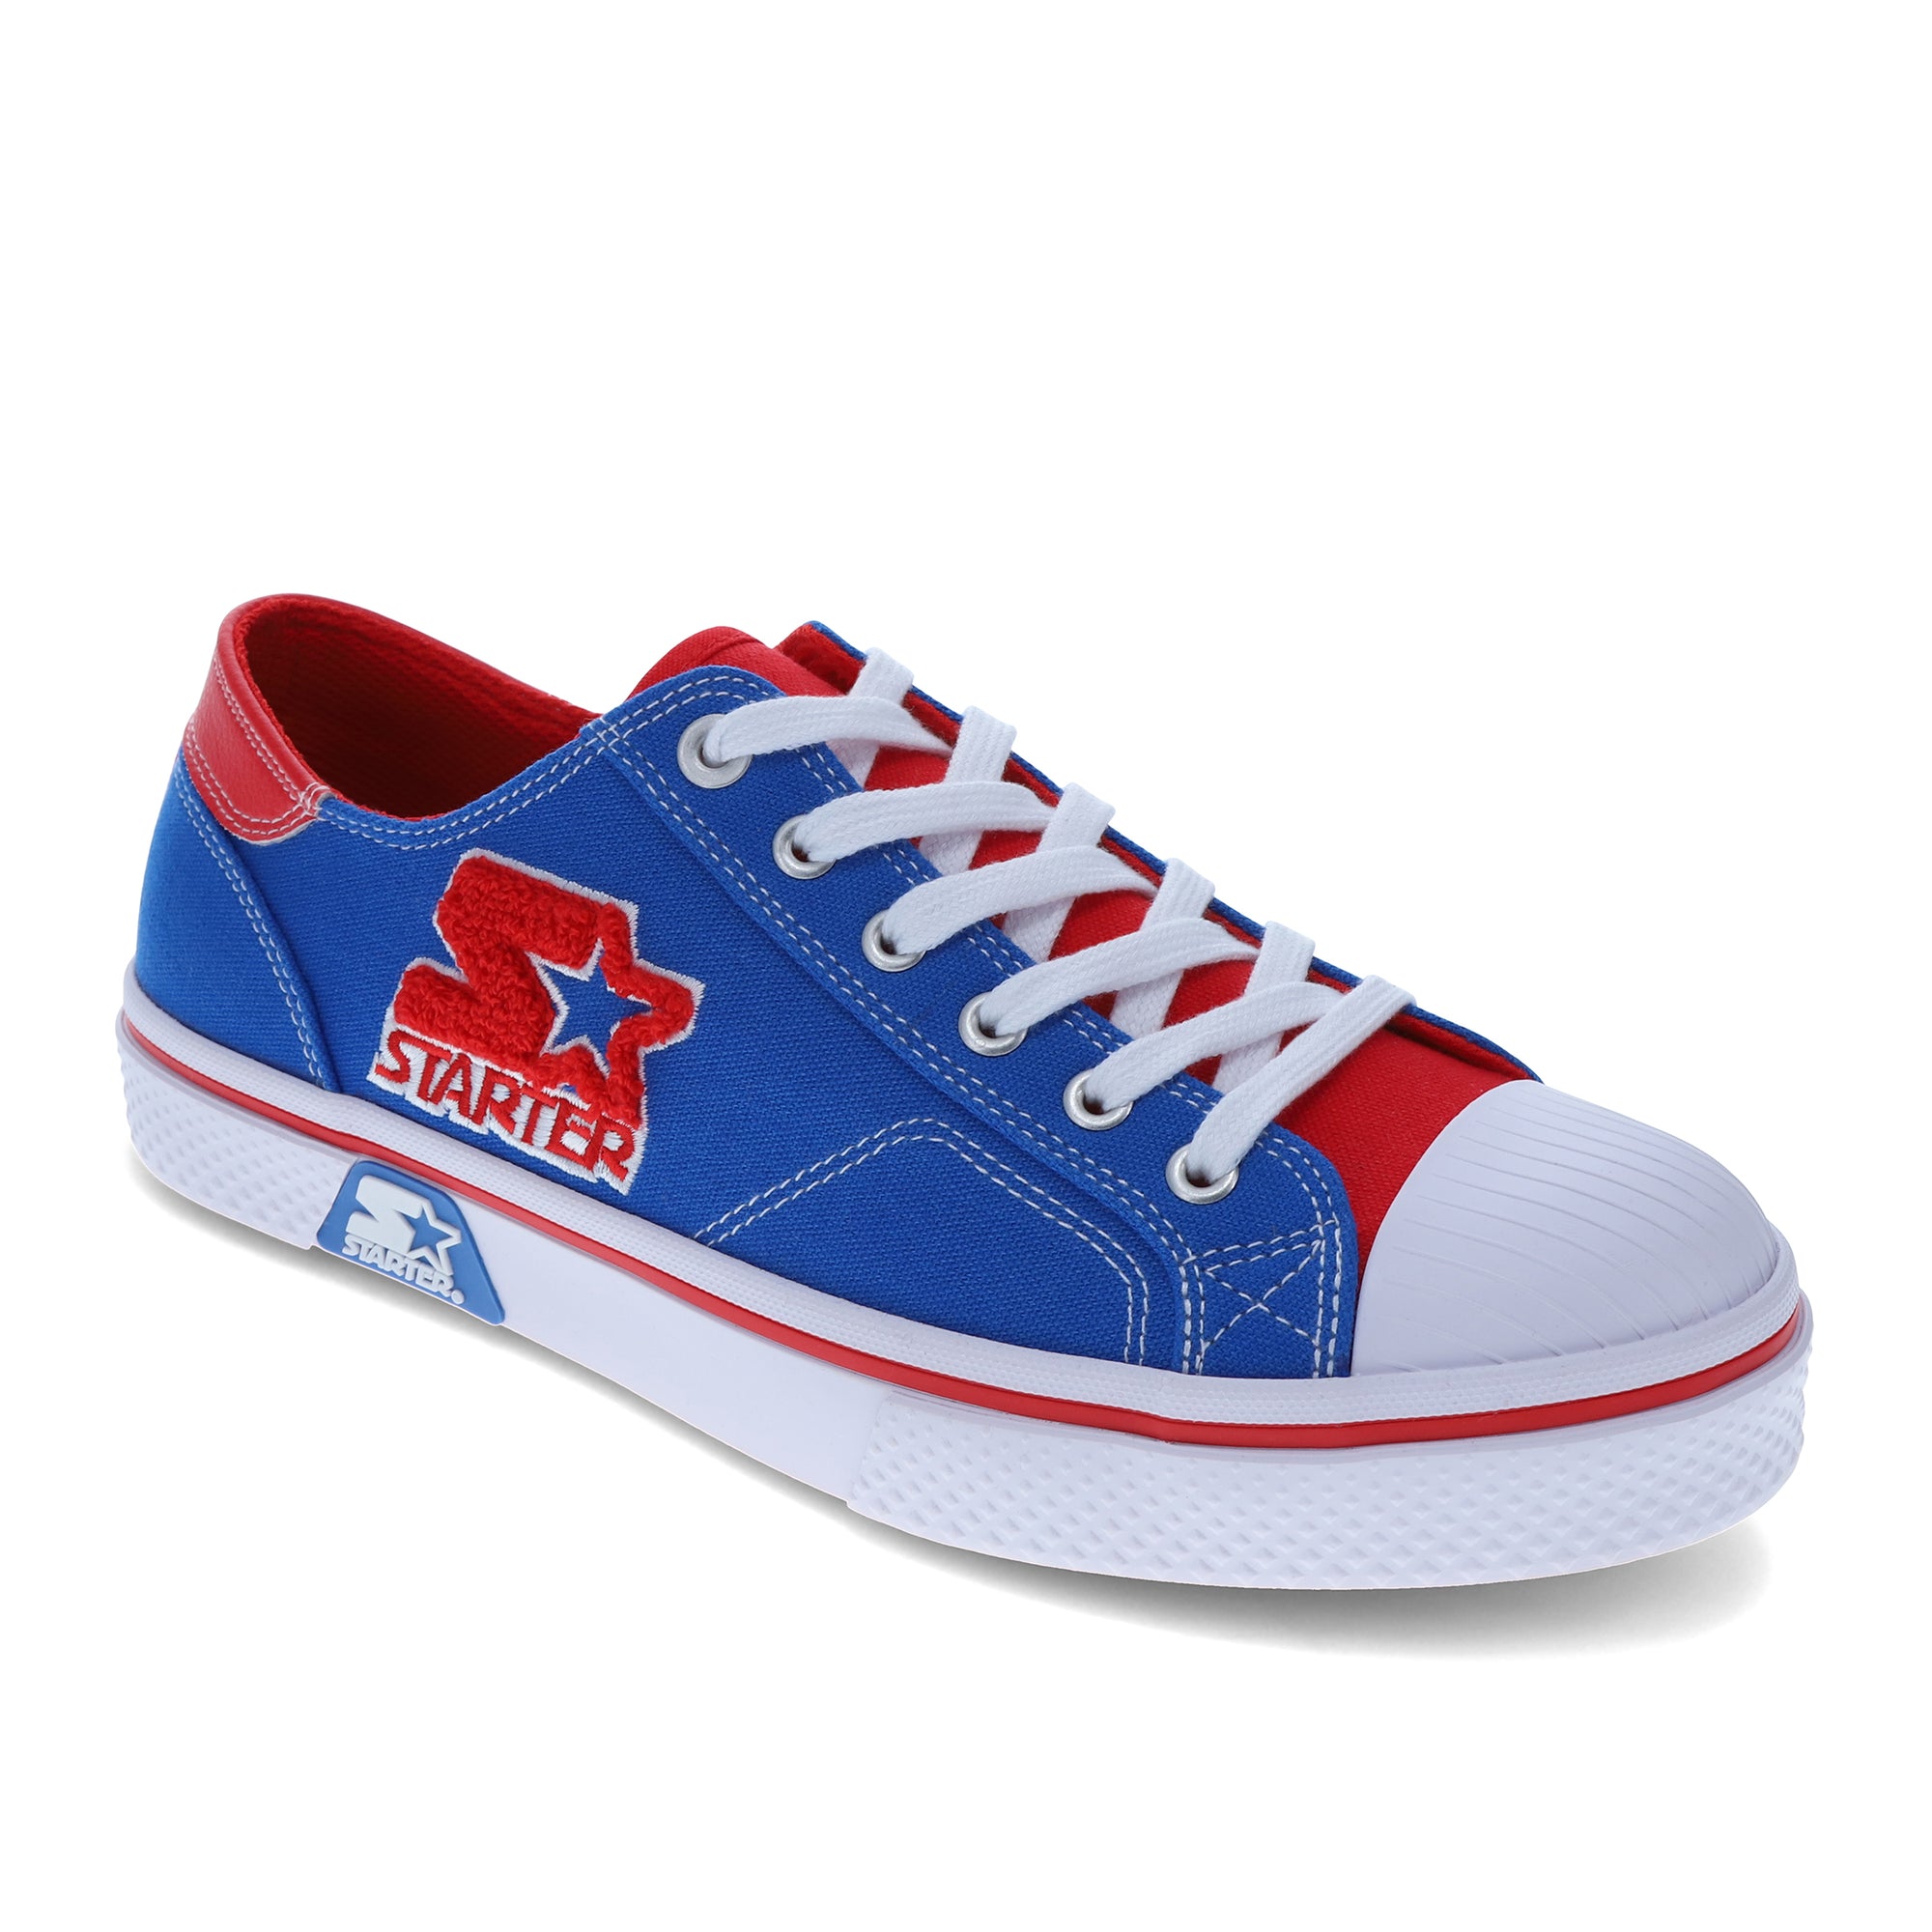 Blue/Red-Starter Mens Tradition 71 Low Canvas Lowtop Casual Sneaker Shoe